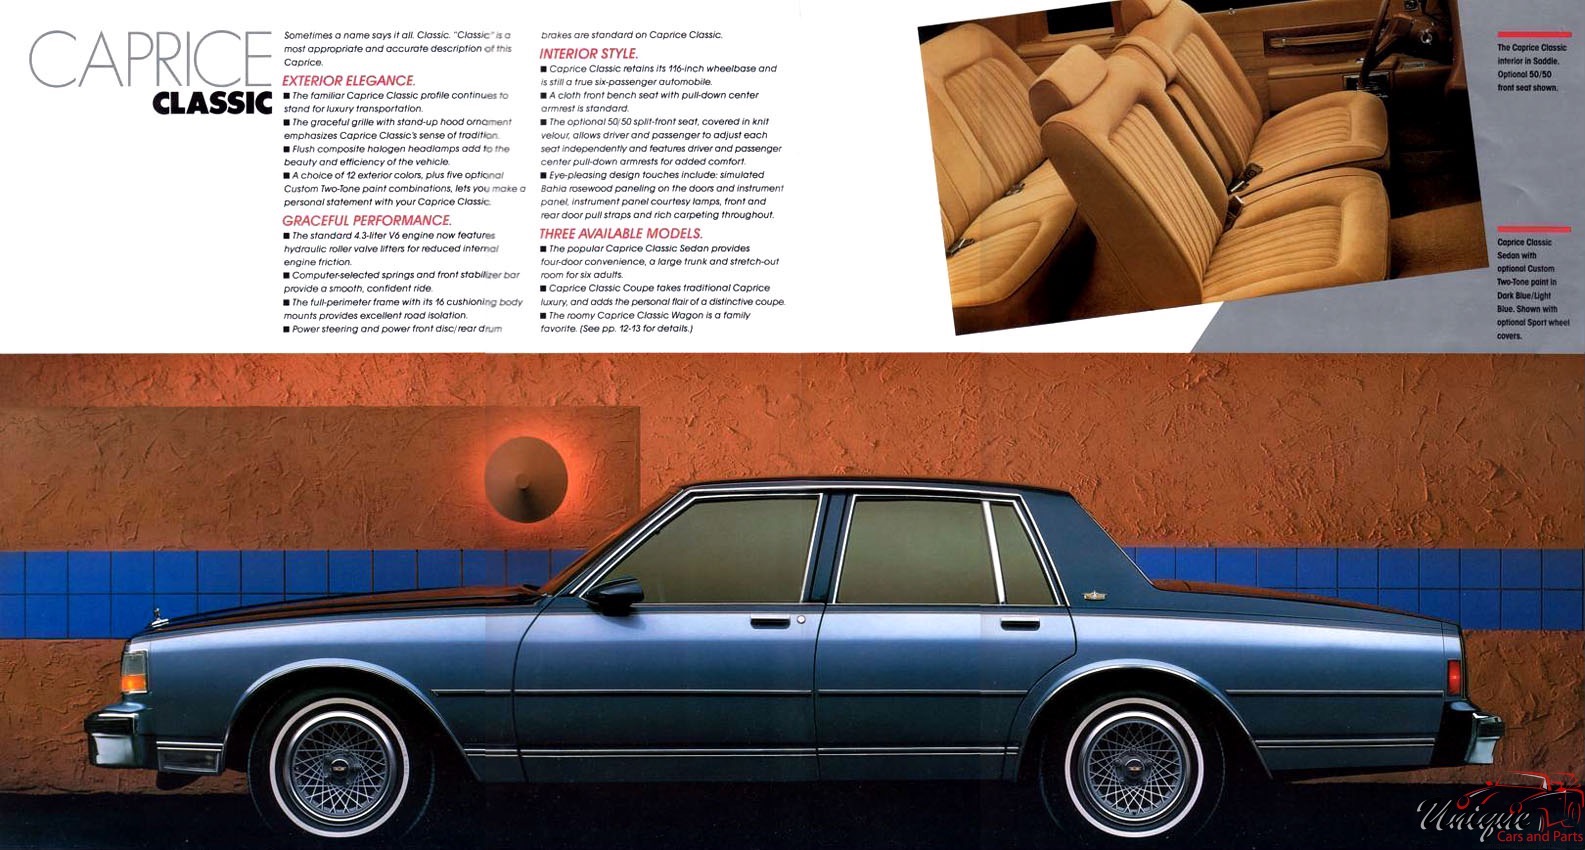 1987 Chevrolet Caprice Classic Brochure Page 1